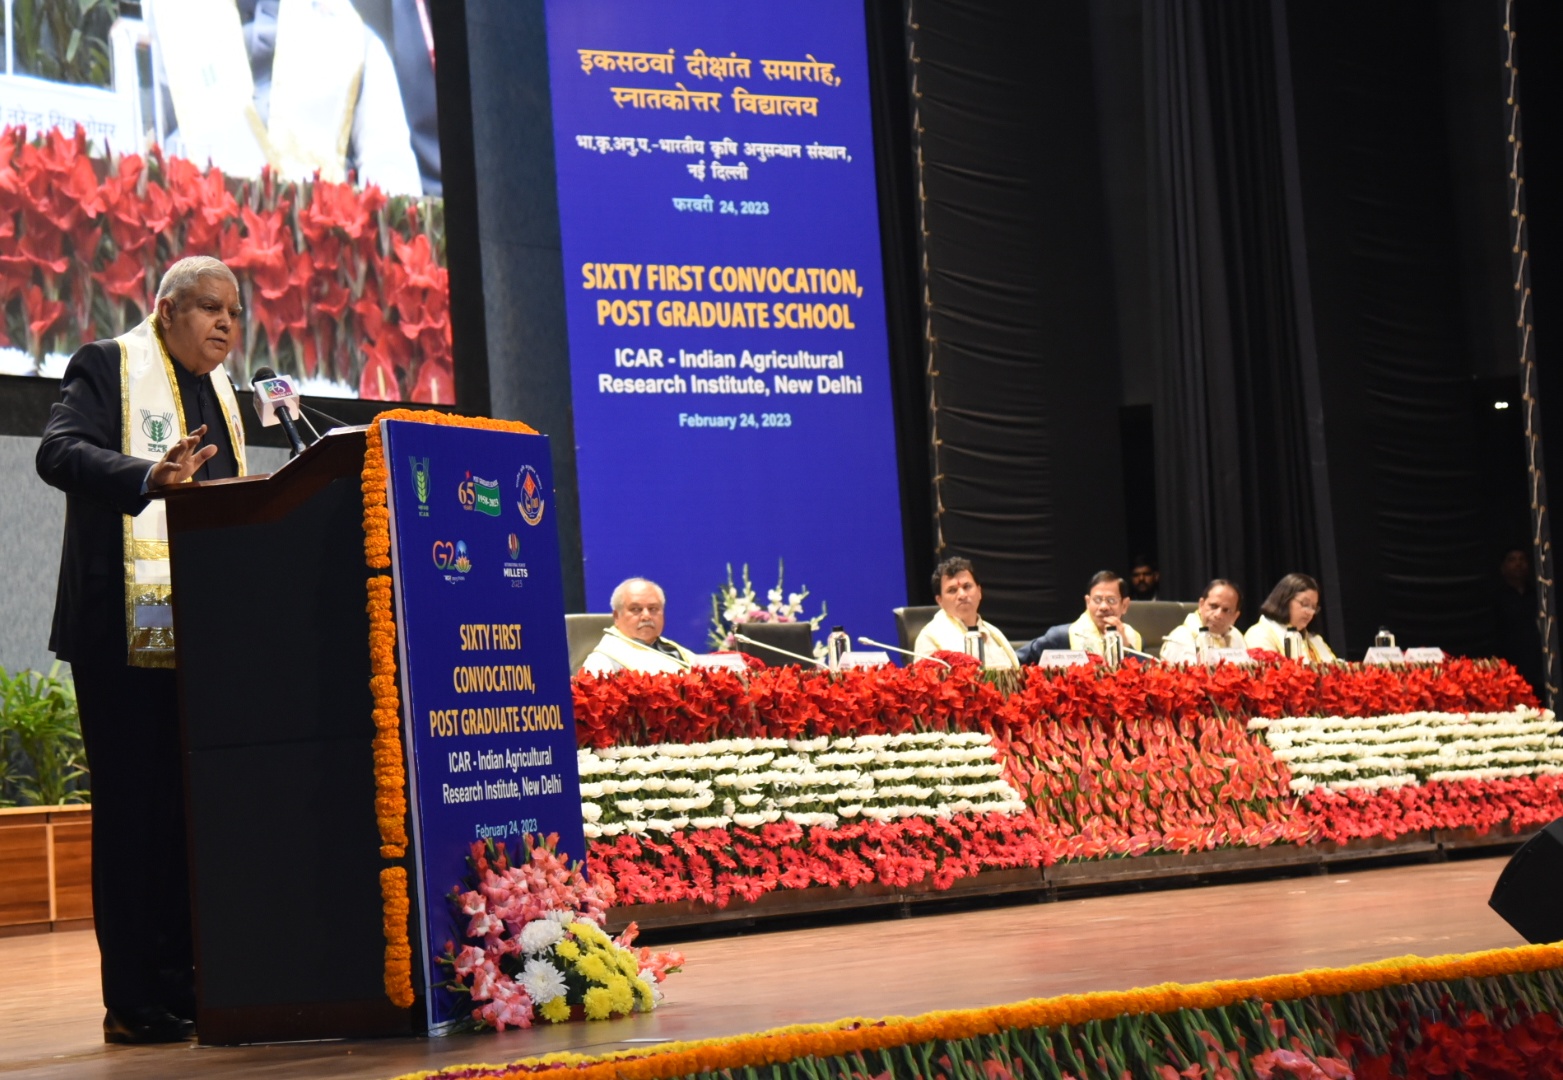 Hon'ble Vice President, Shri Jagdeep Dhankhar addressed the gathering at the 61st convocation ceremony of ICAR-IARI on February 24, 2023.